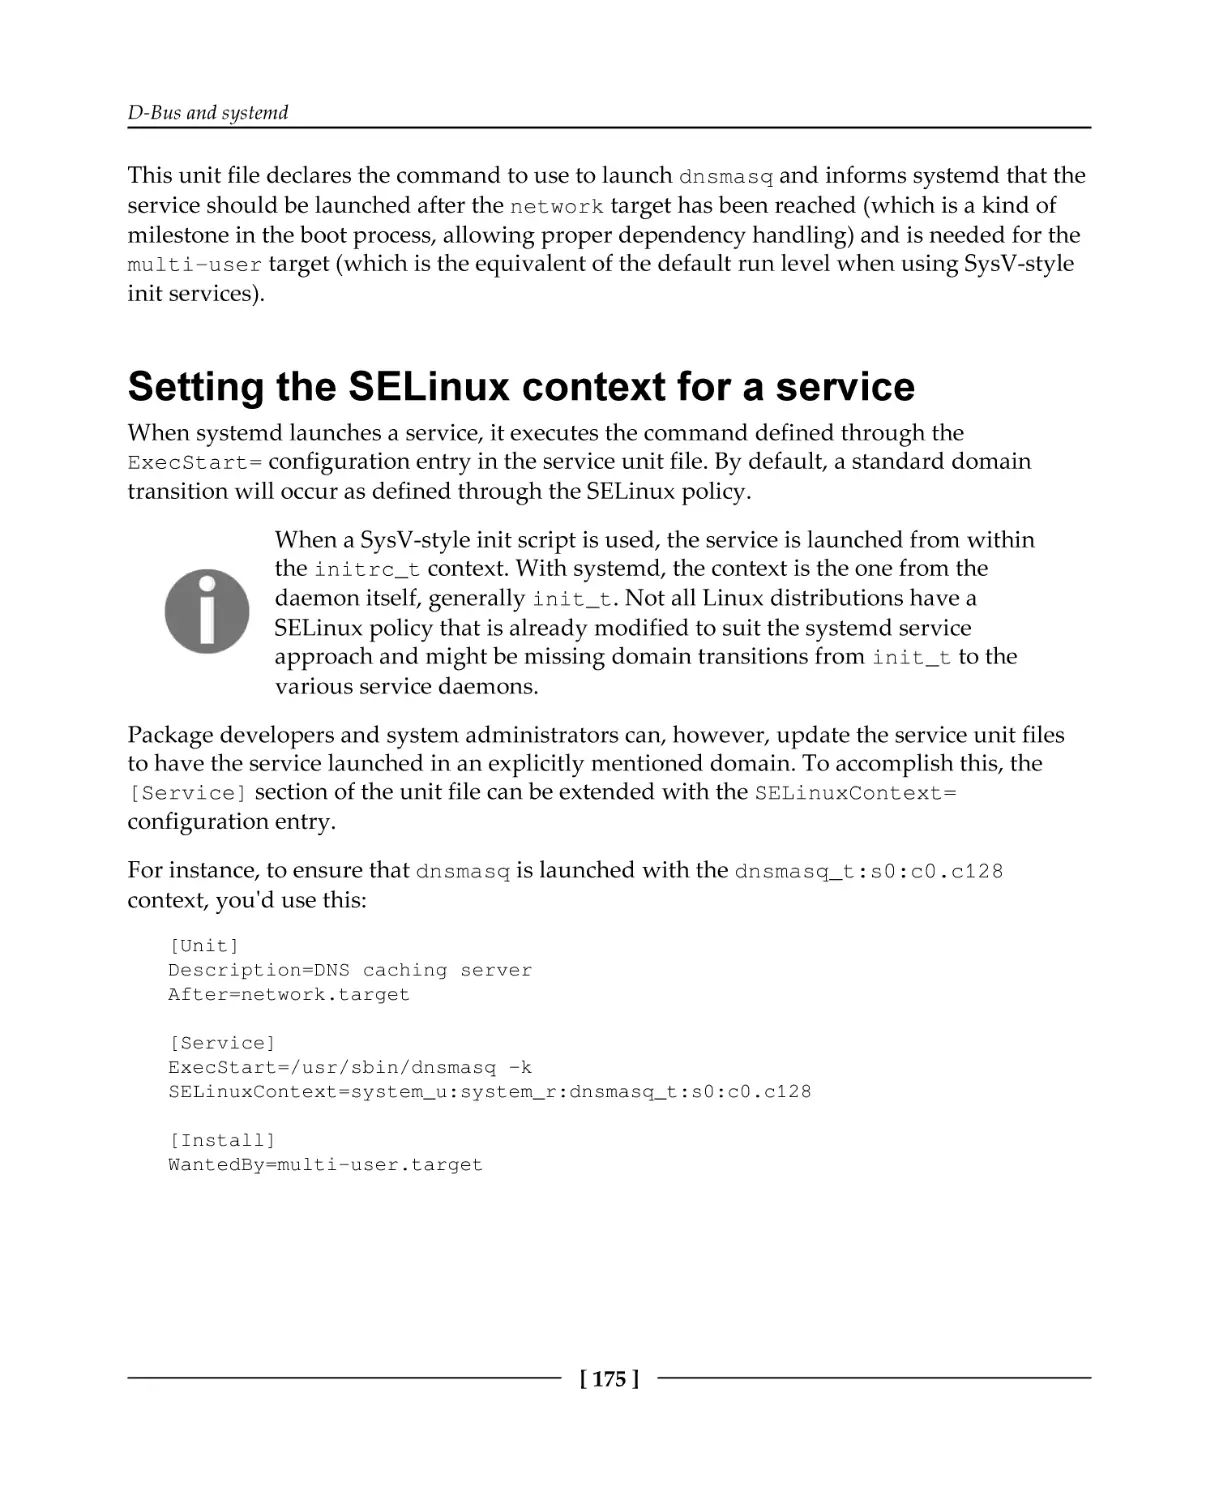 Setting the SELinux context for a service